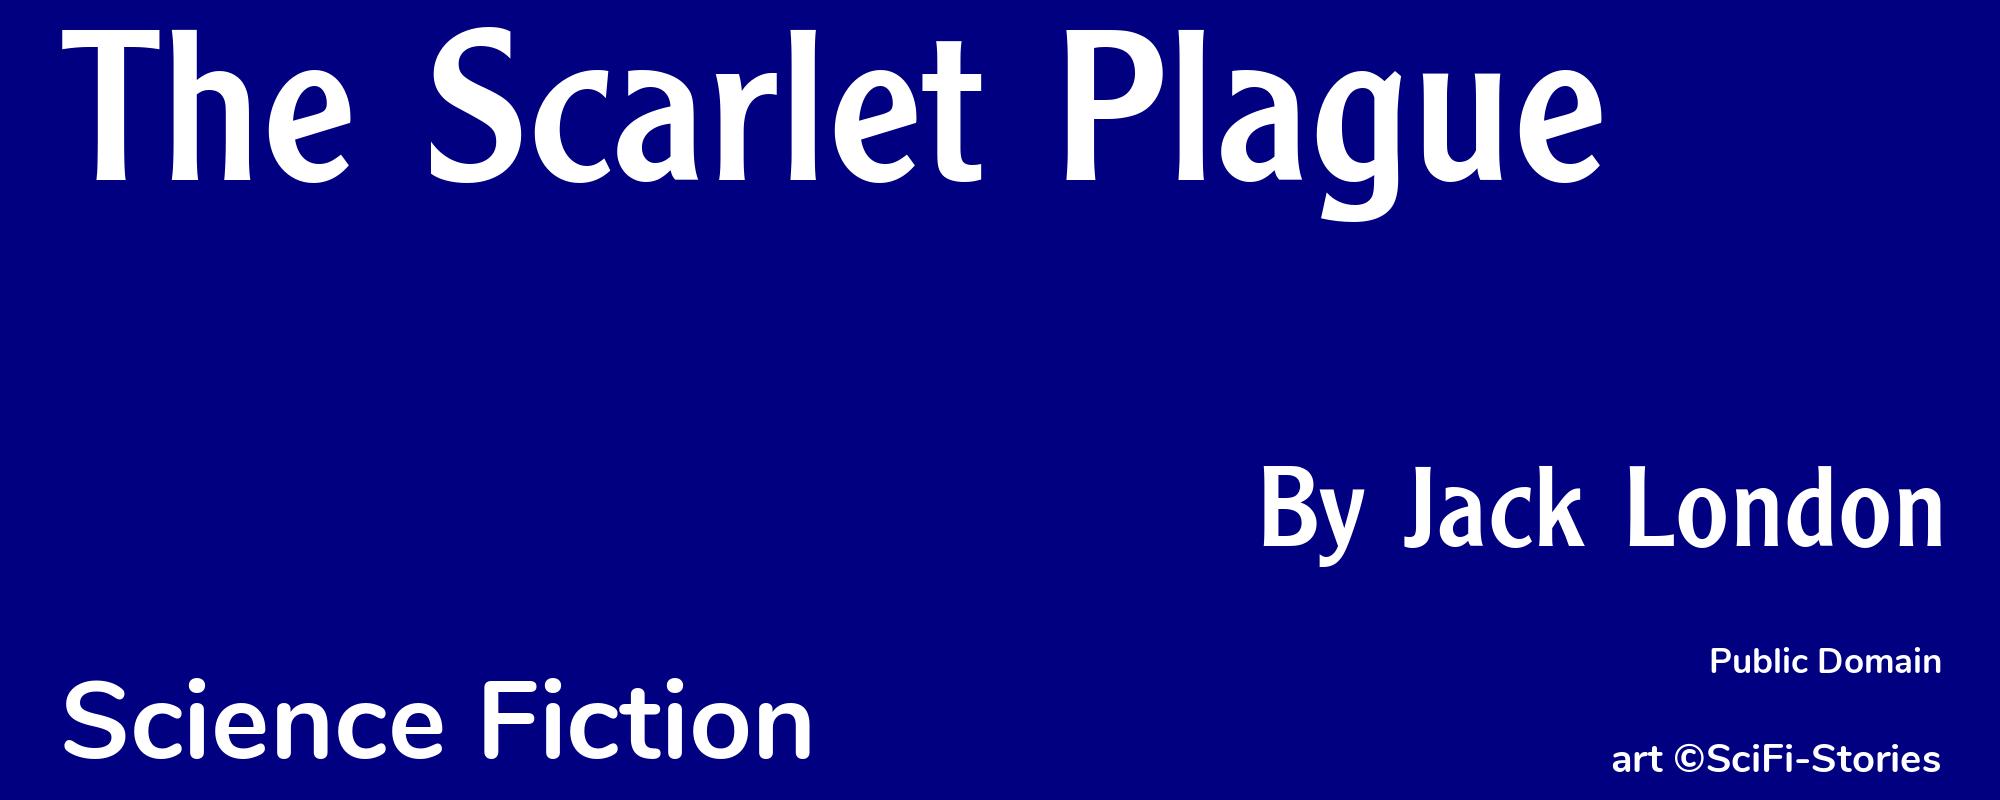 The Scarlet Plague - Cover